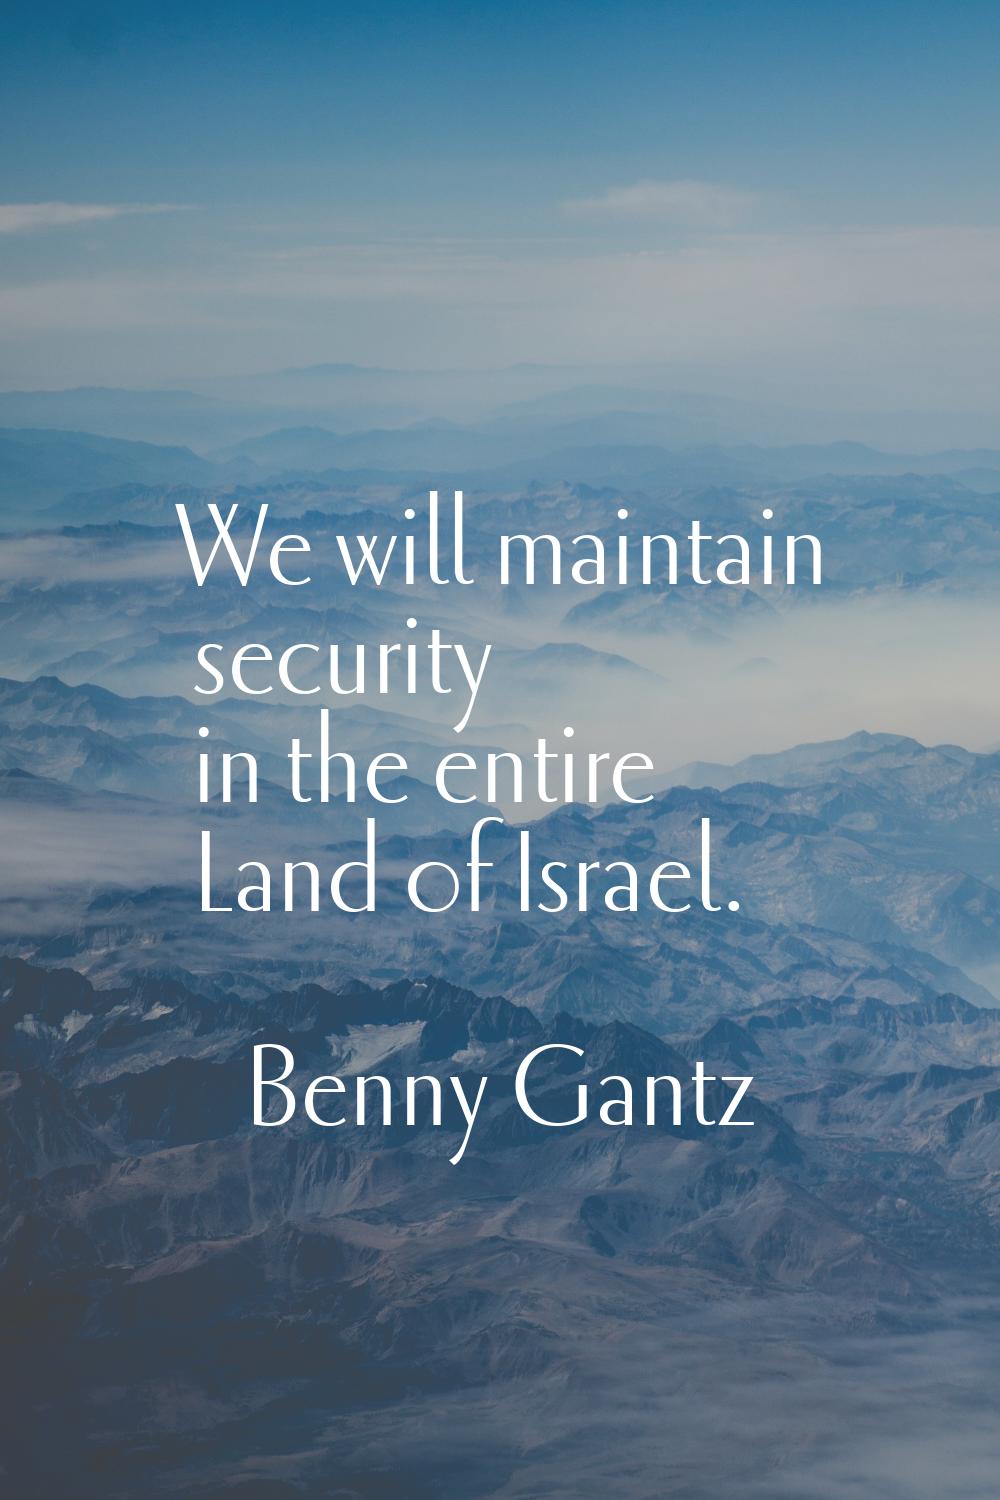 We will maintain security in the entire Land of Israel.